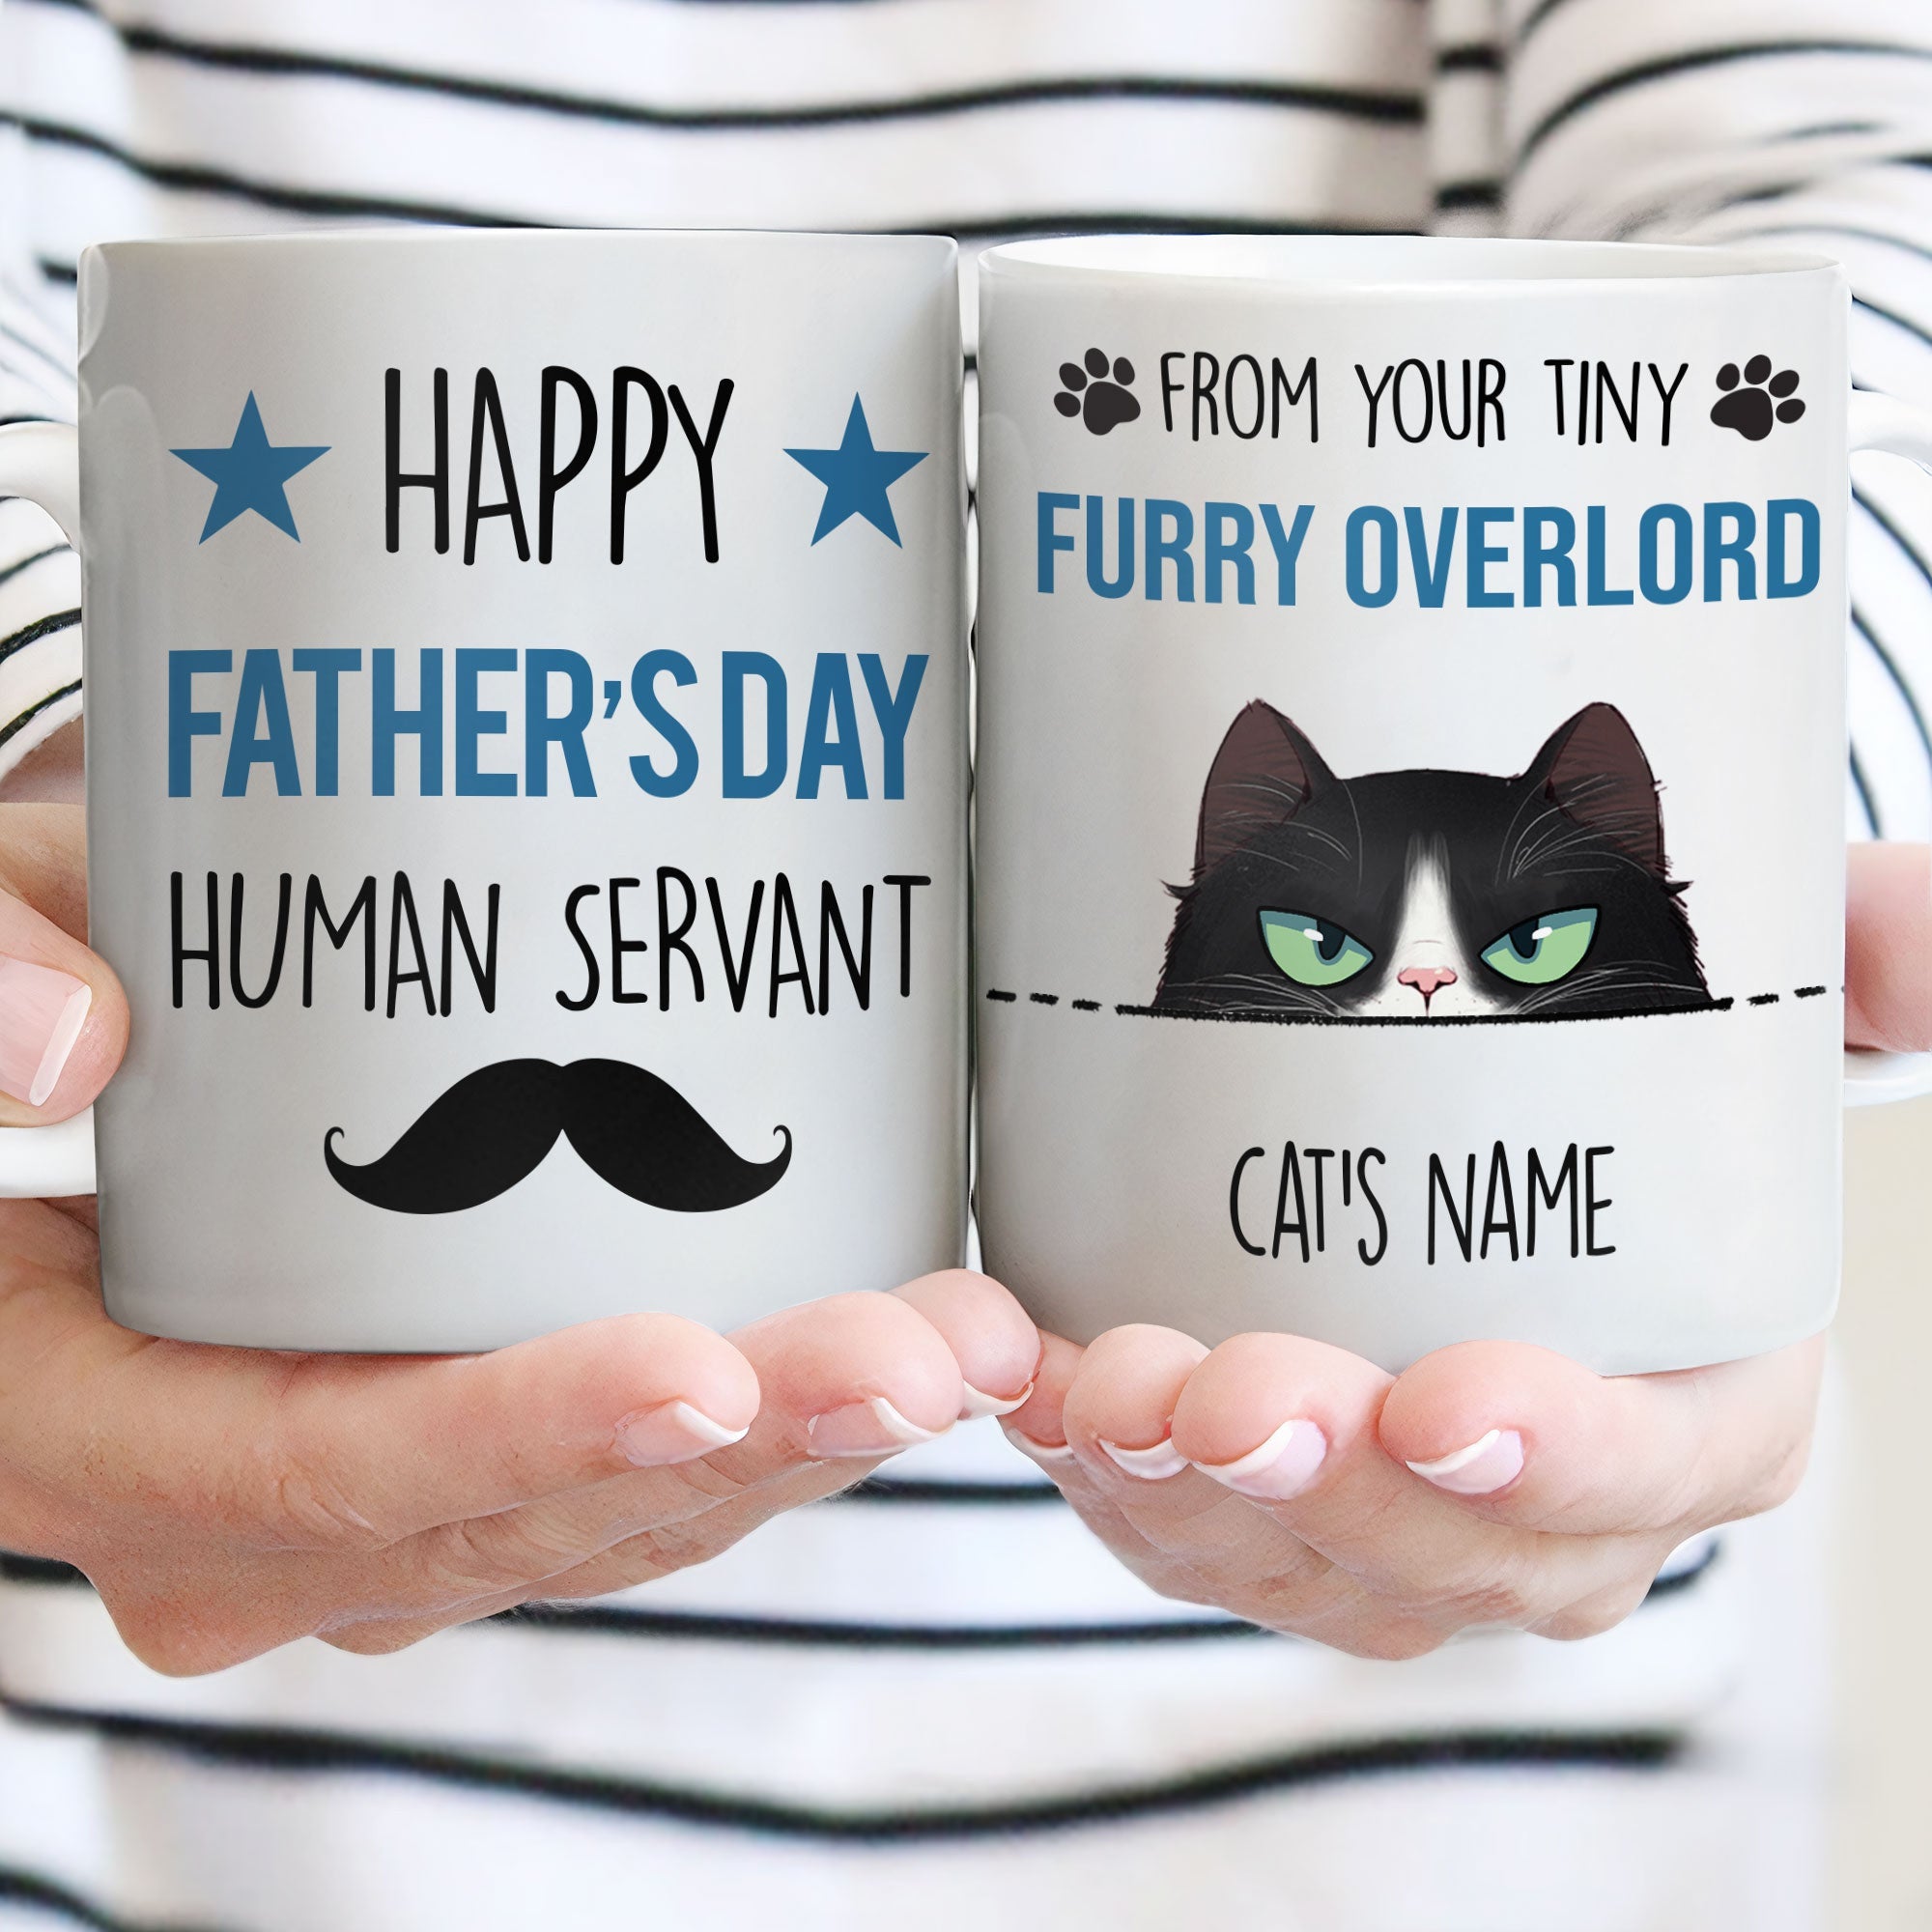 Your Tiny Furry Overlords - Personalized Mug - Father's Day Gift For Cat Dad  - Peeking Cats